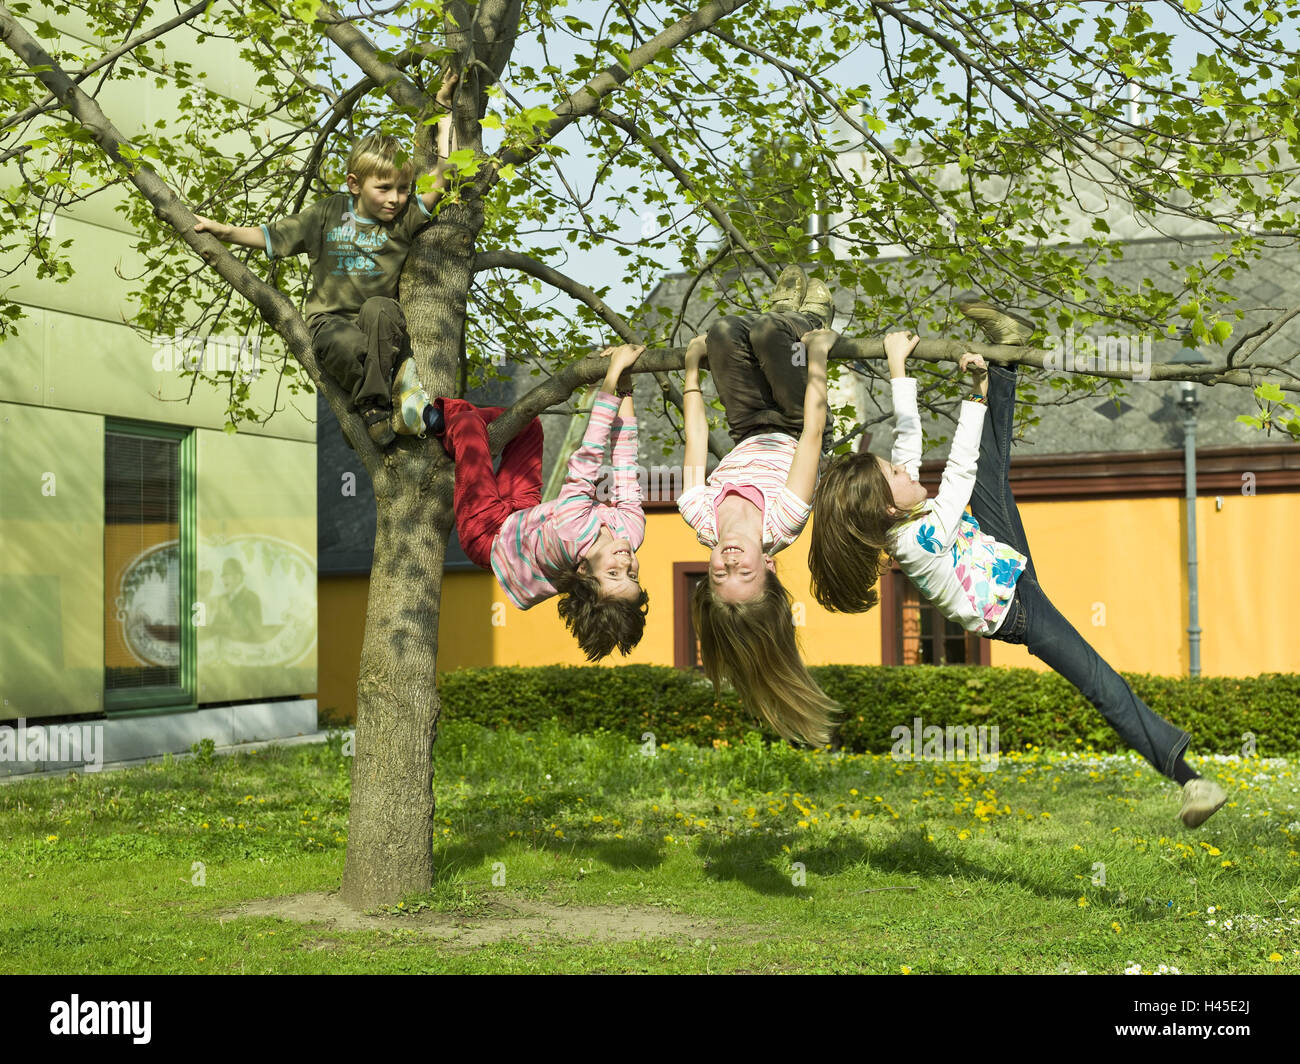 Children, tree, climb, hang headlong, girls, boy, four, branch, leaves, turfs, playground, play, do gymnastics, motion, happily, leisure time, childhood, school hours, swing, sport, person, outside, melted, stick, hold, fun, break, whole bodies, Stock Photo